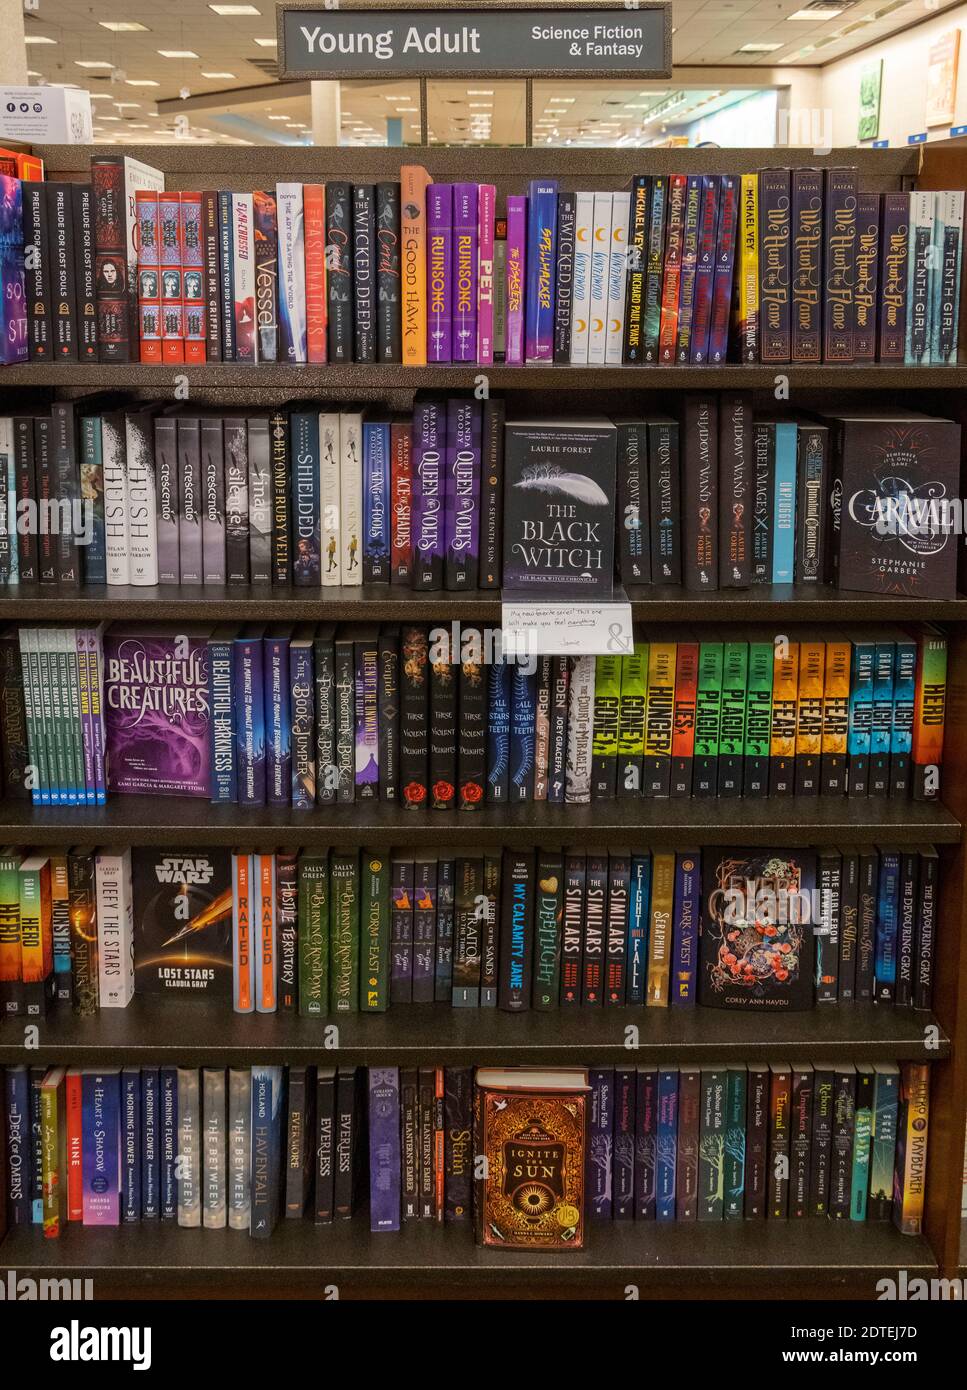 Young adult Science Fiction and Fantasy books, Barnes and Noble, USA Stockfoto